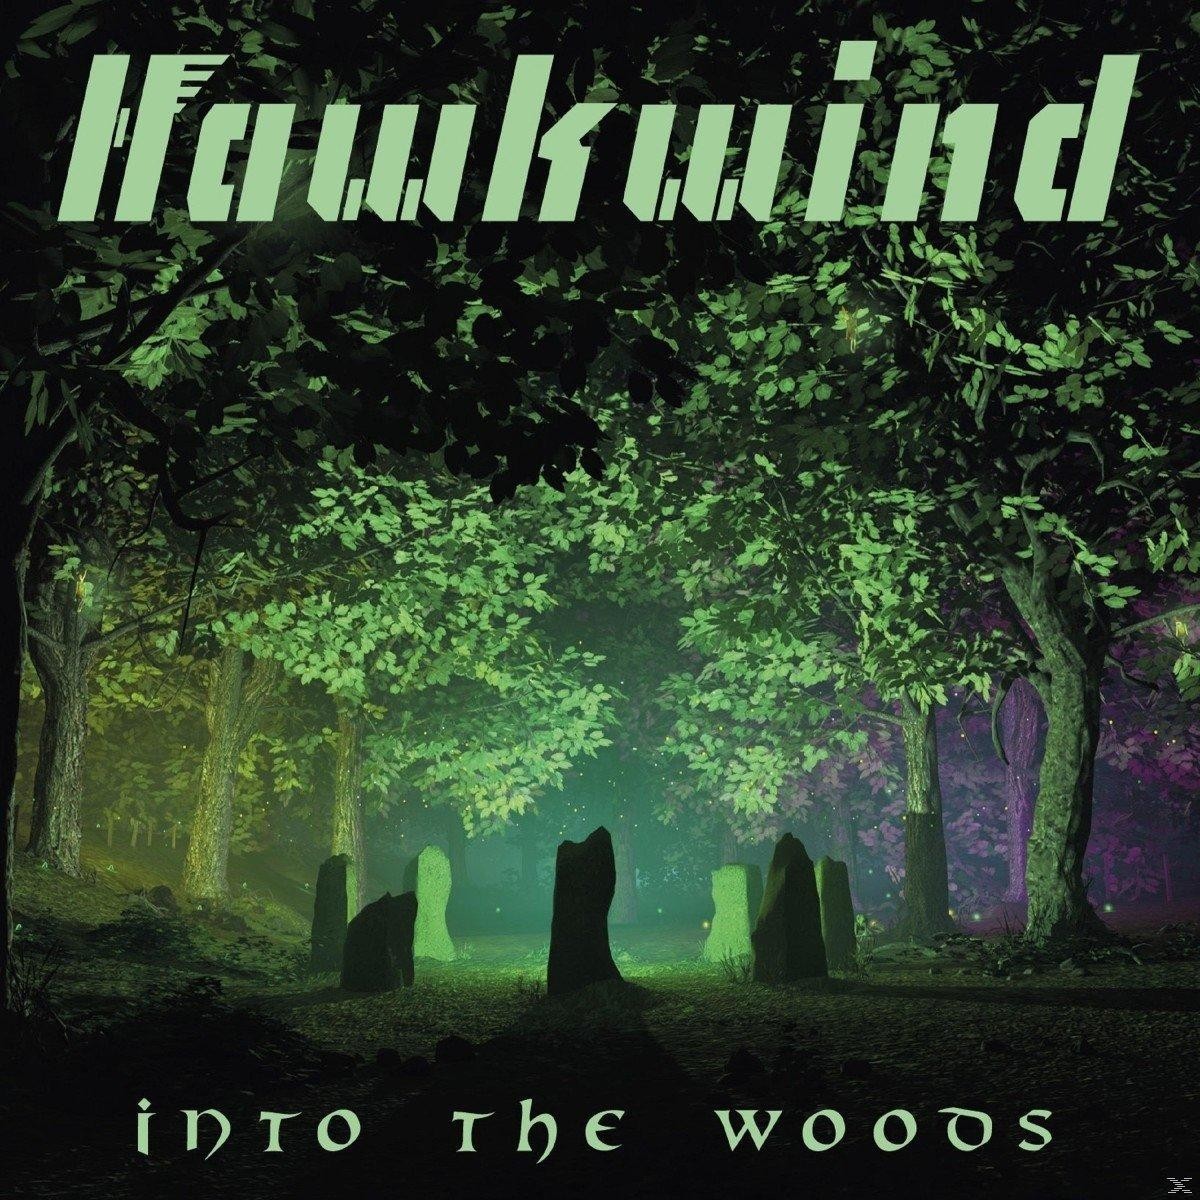 Woods Hawkwind Into (CD) - The -